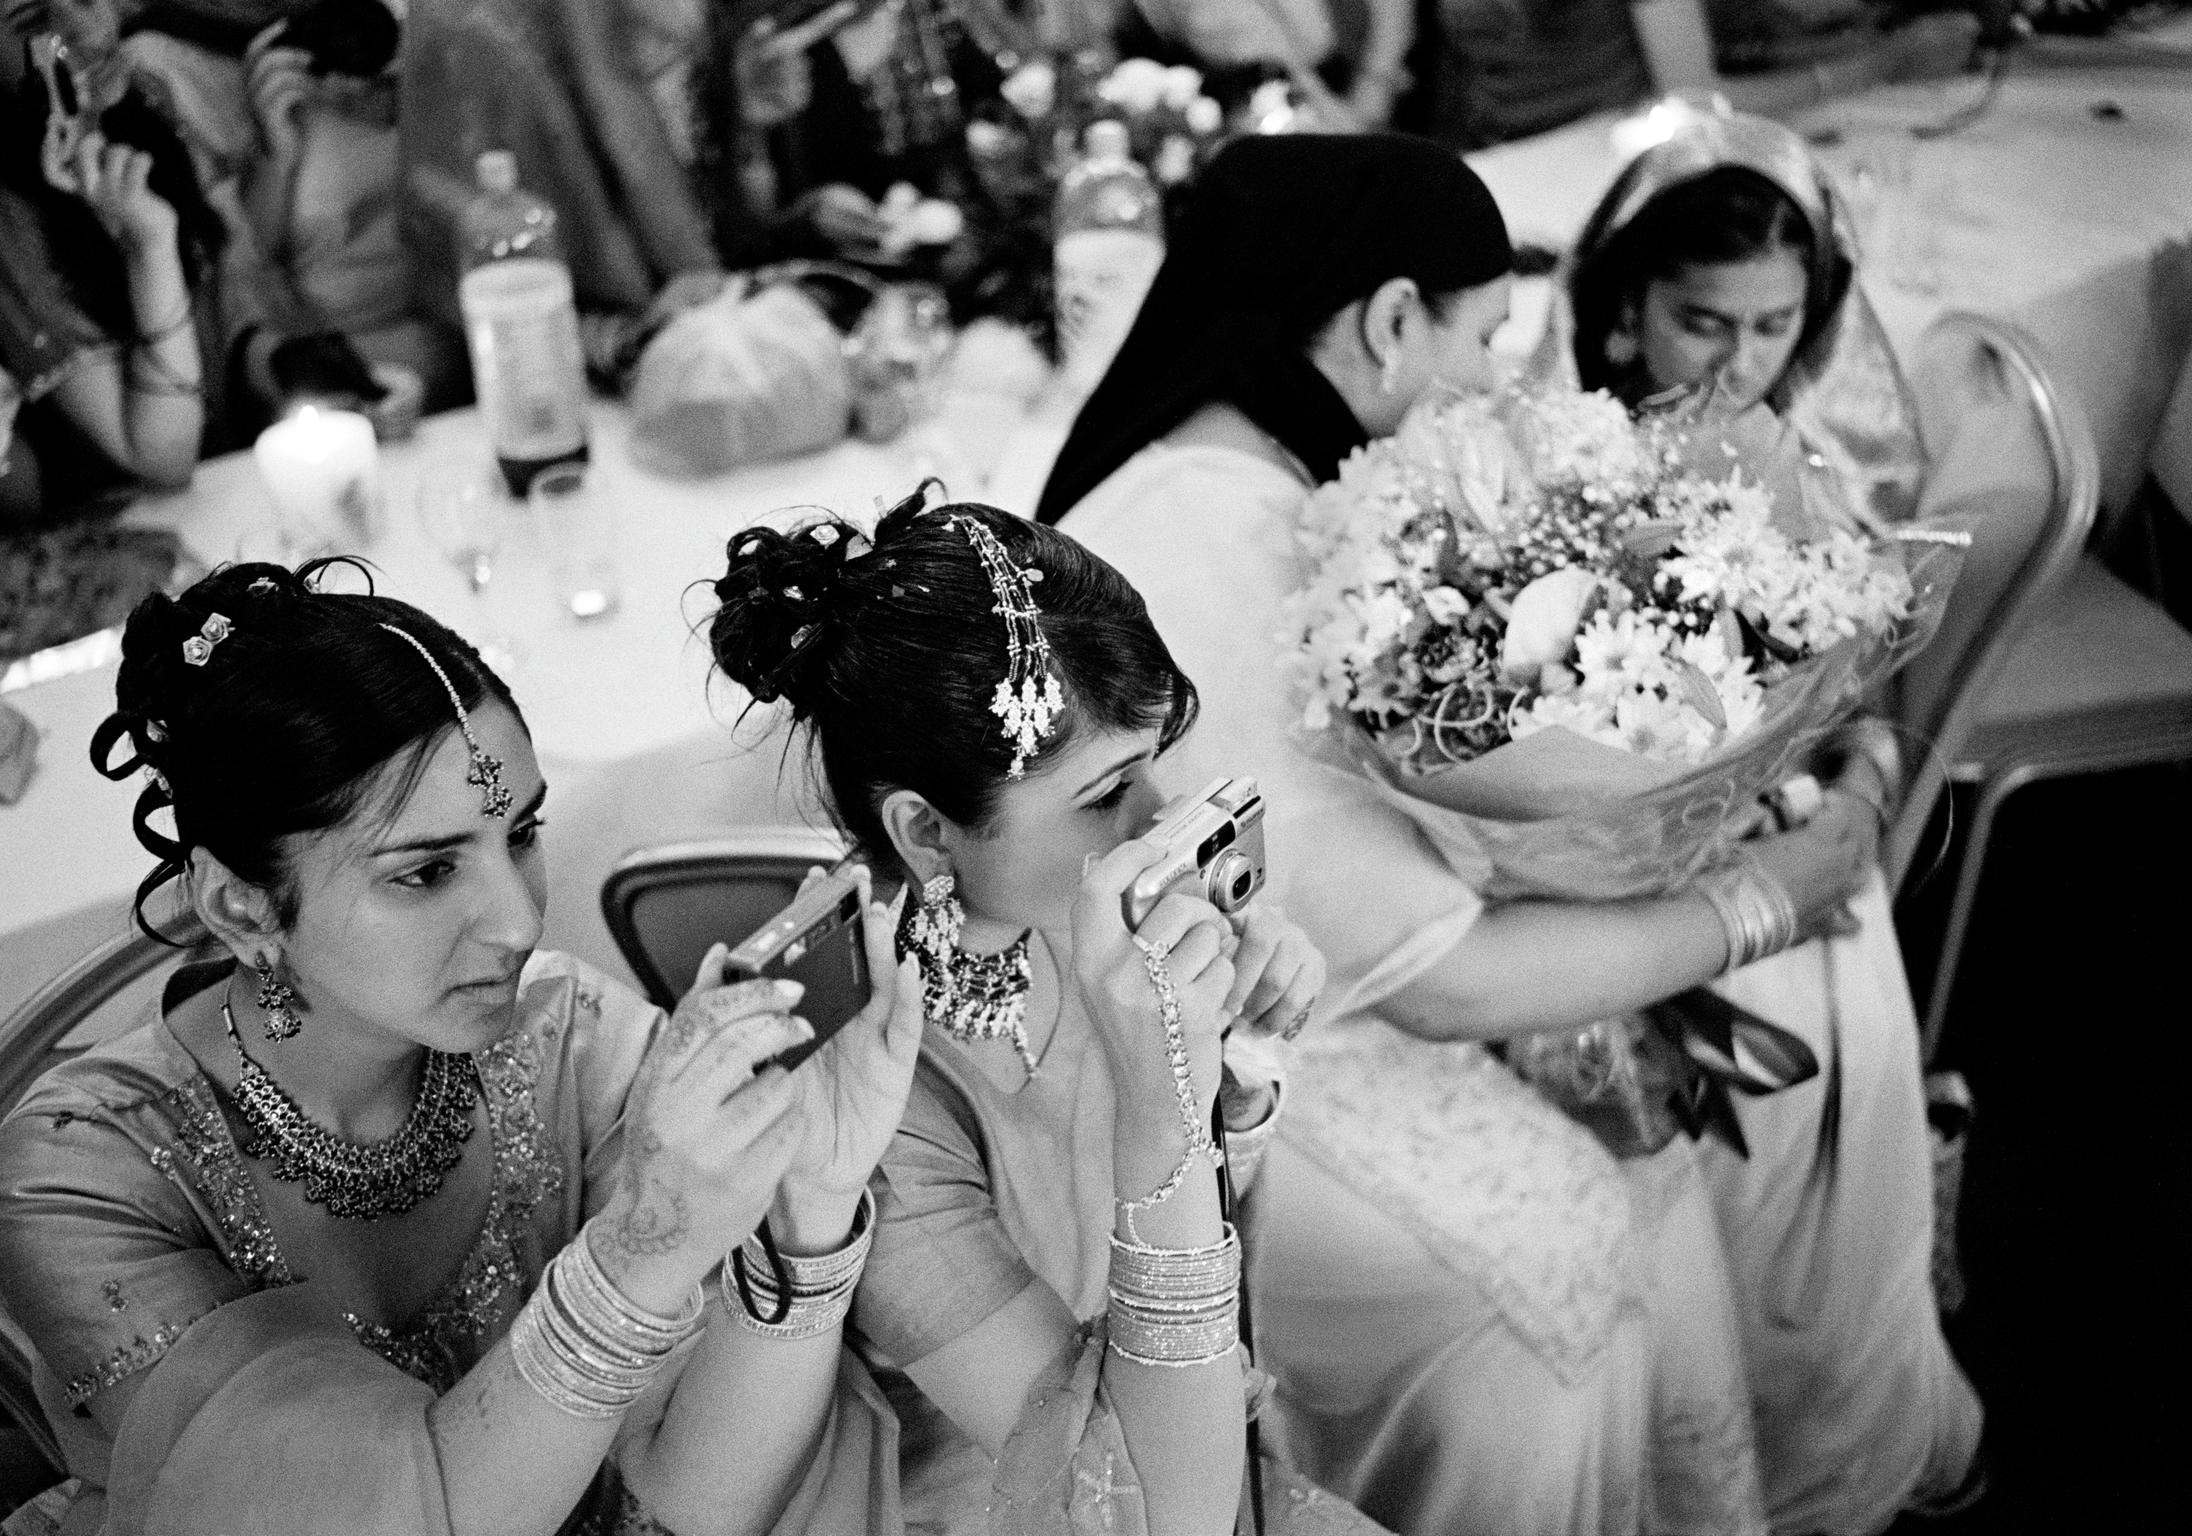 Asian wedding in the City Hall in Cardiff. The aversion of being photographed is not prevalent in young modern muslims